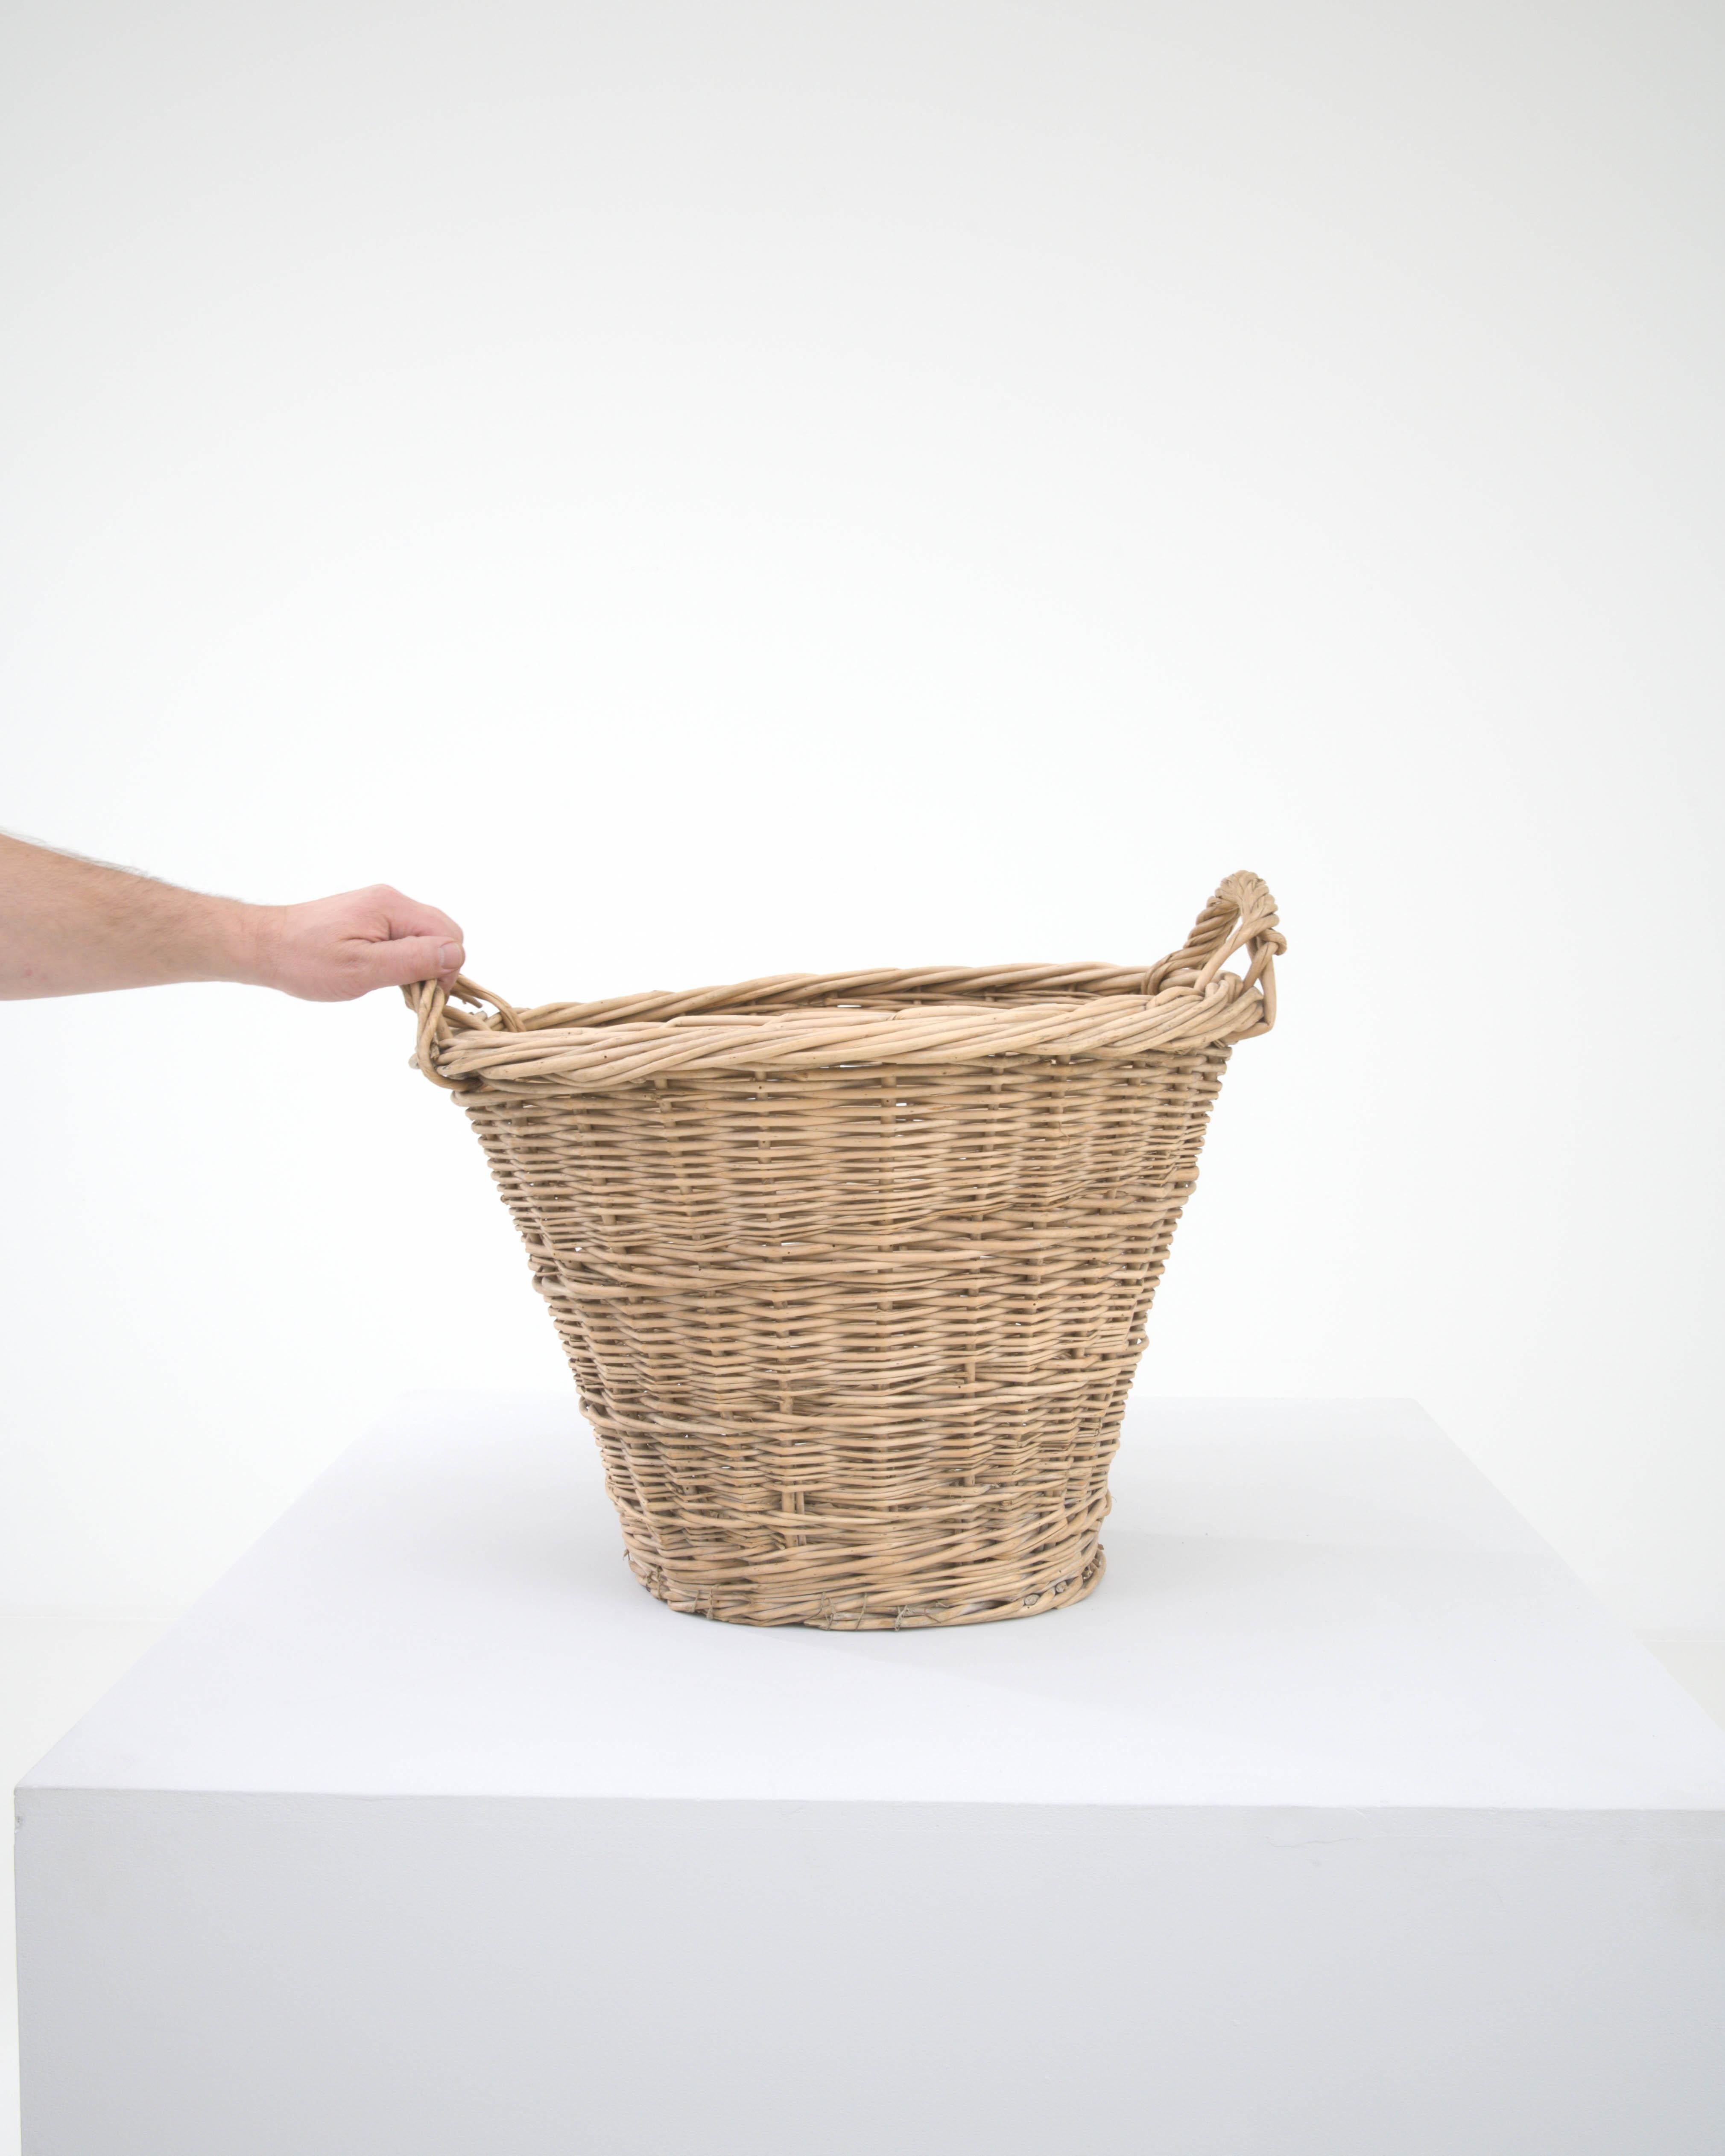 This 20th Century Belgian Wicker Basket is an embodiment of practical beauty, weaving together functionality with the charm of rustic aesthetics. Its robust and curvaceous form offers ample space, perfect for an array of uses, from holding your